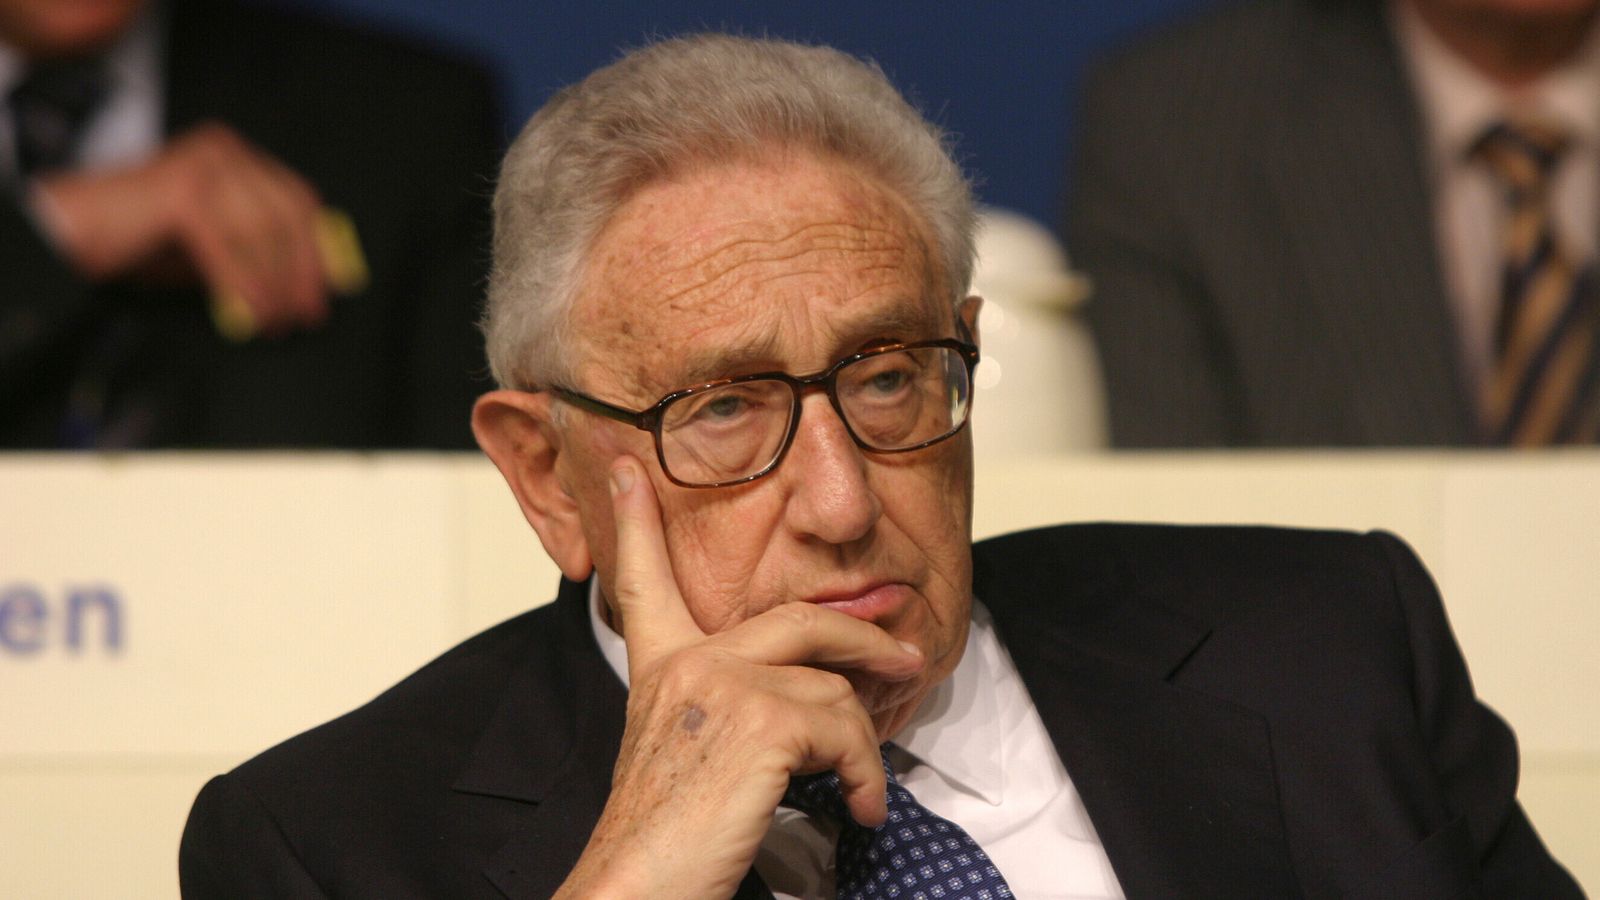 Former United States secretary of state Henry Kissinger has died aged 100